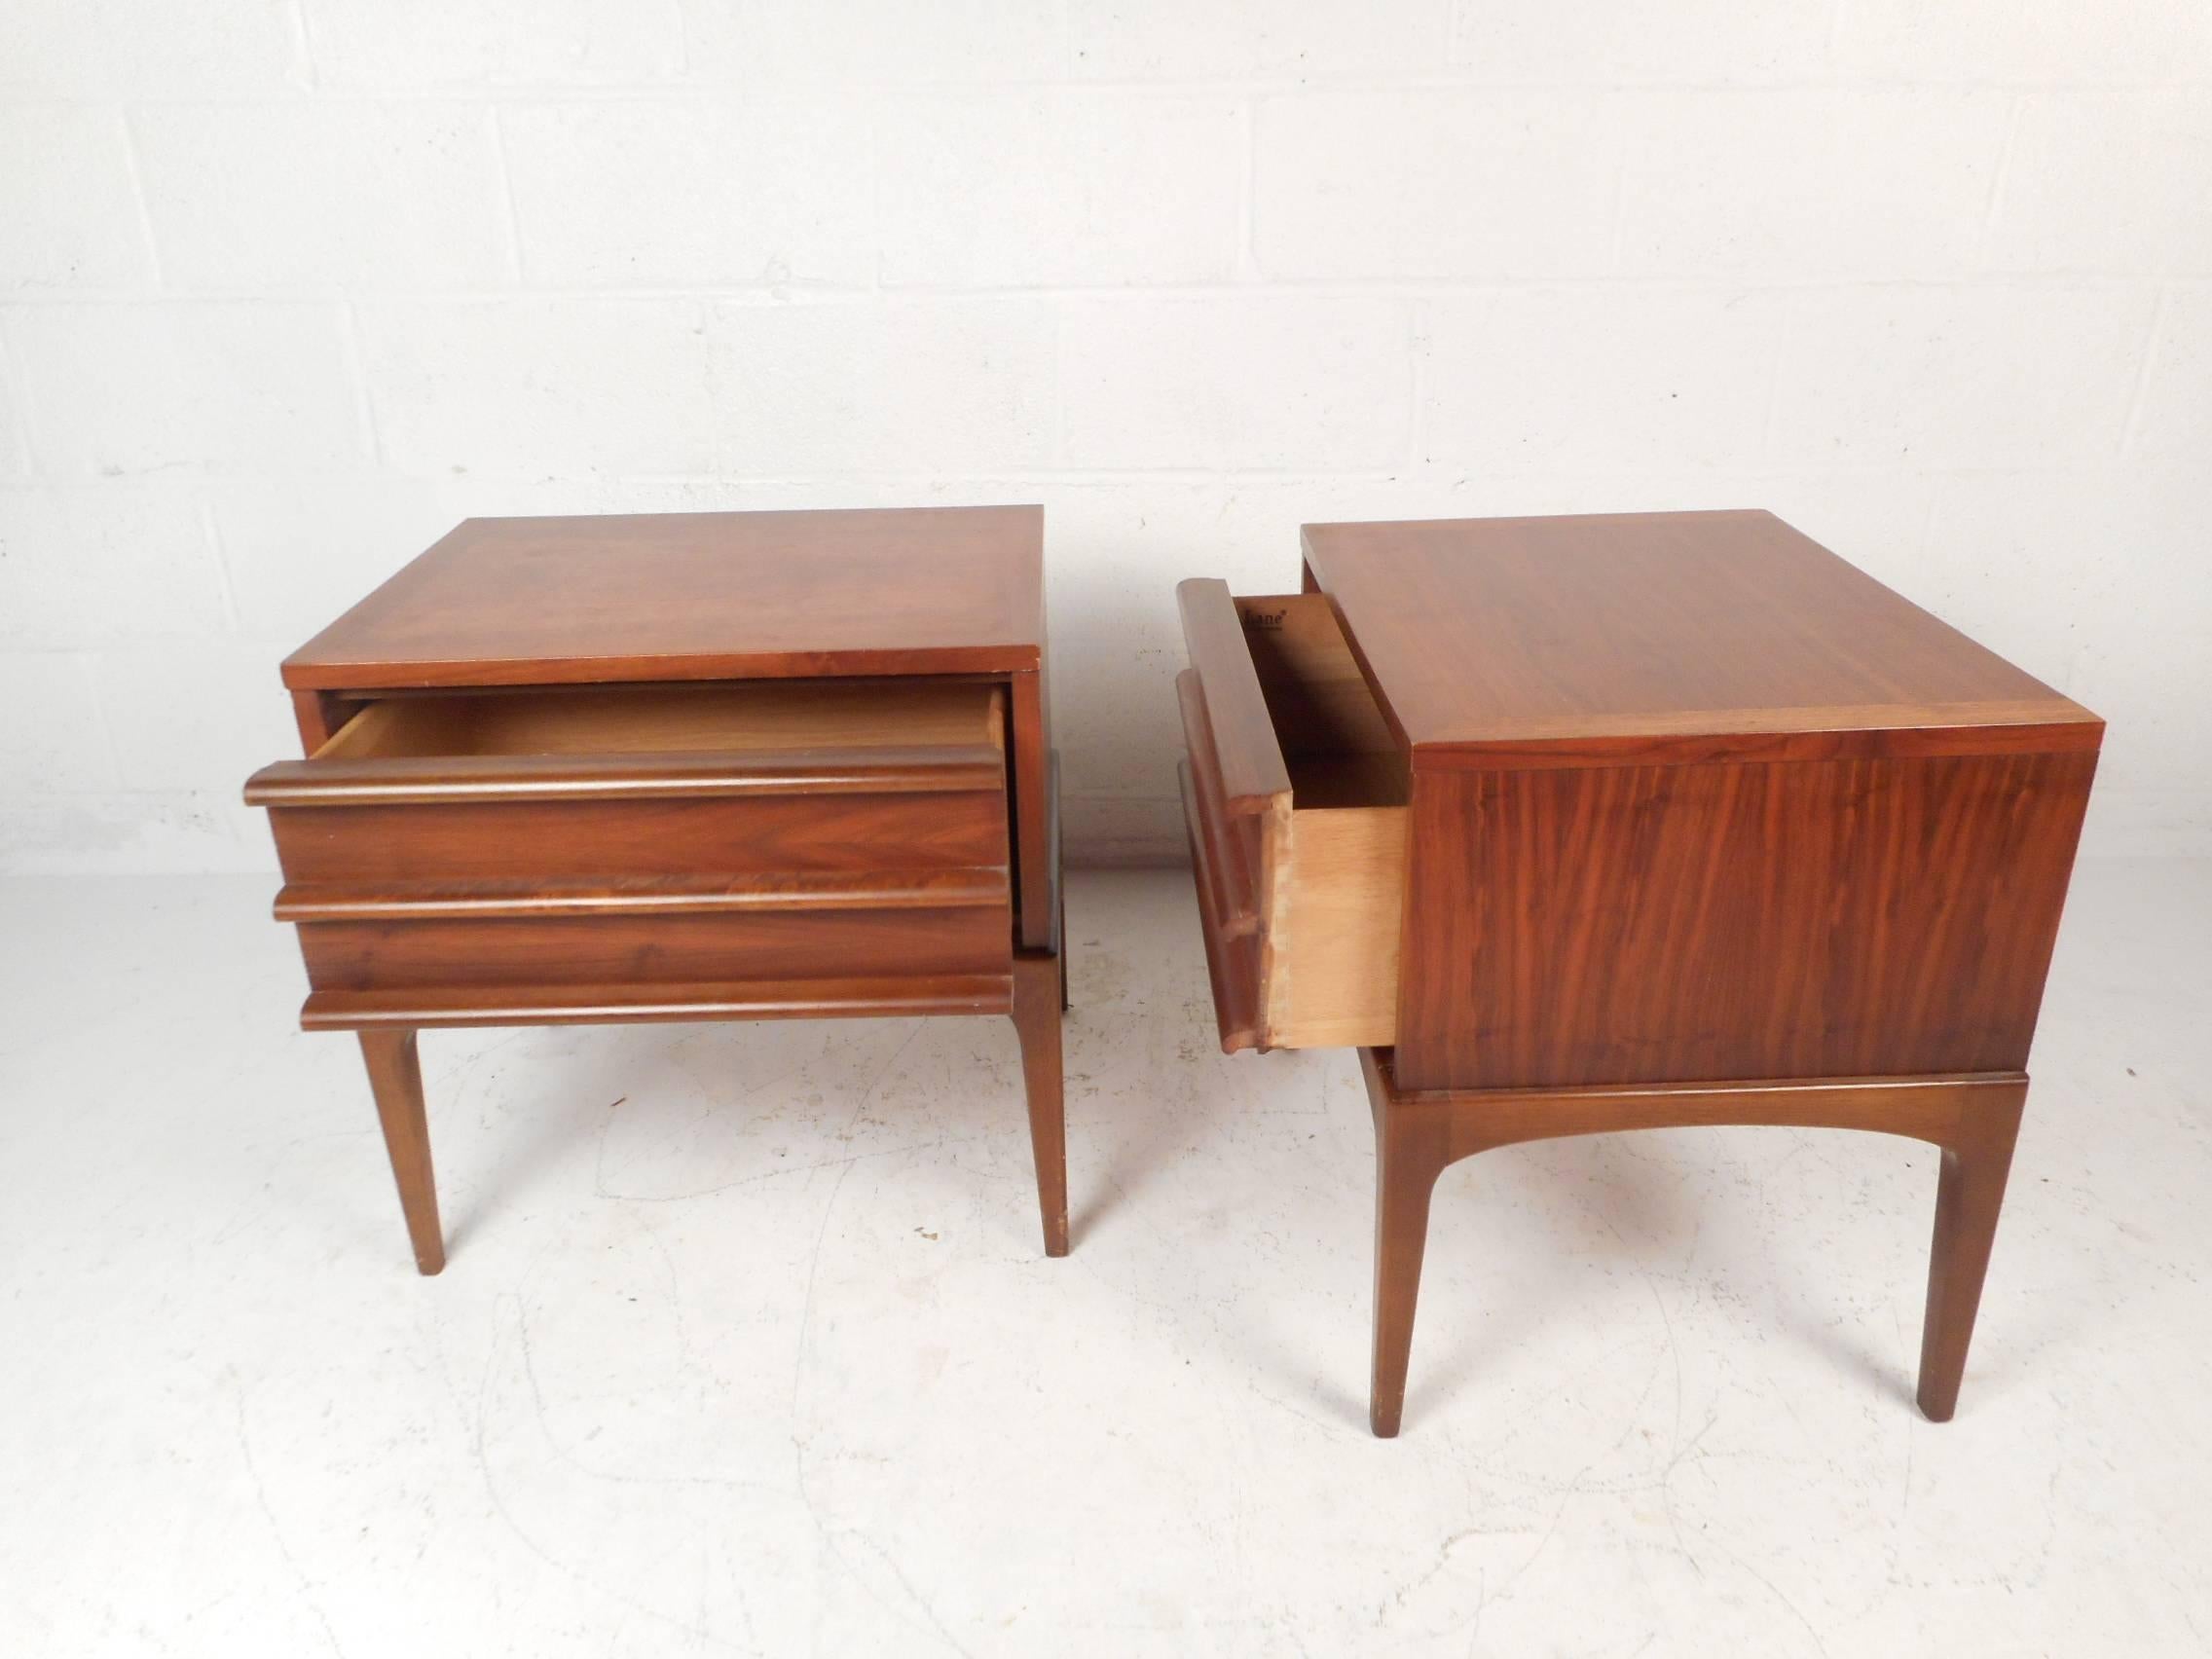 This beautiful pair of vintage modern end tables feature one large drawer with unique sculpted pulls. Quality craftsmanship on display with long tapered legs and stunning walnut wood grain throughout. This versatile pair work perfectly in the